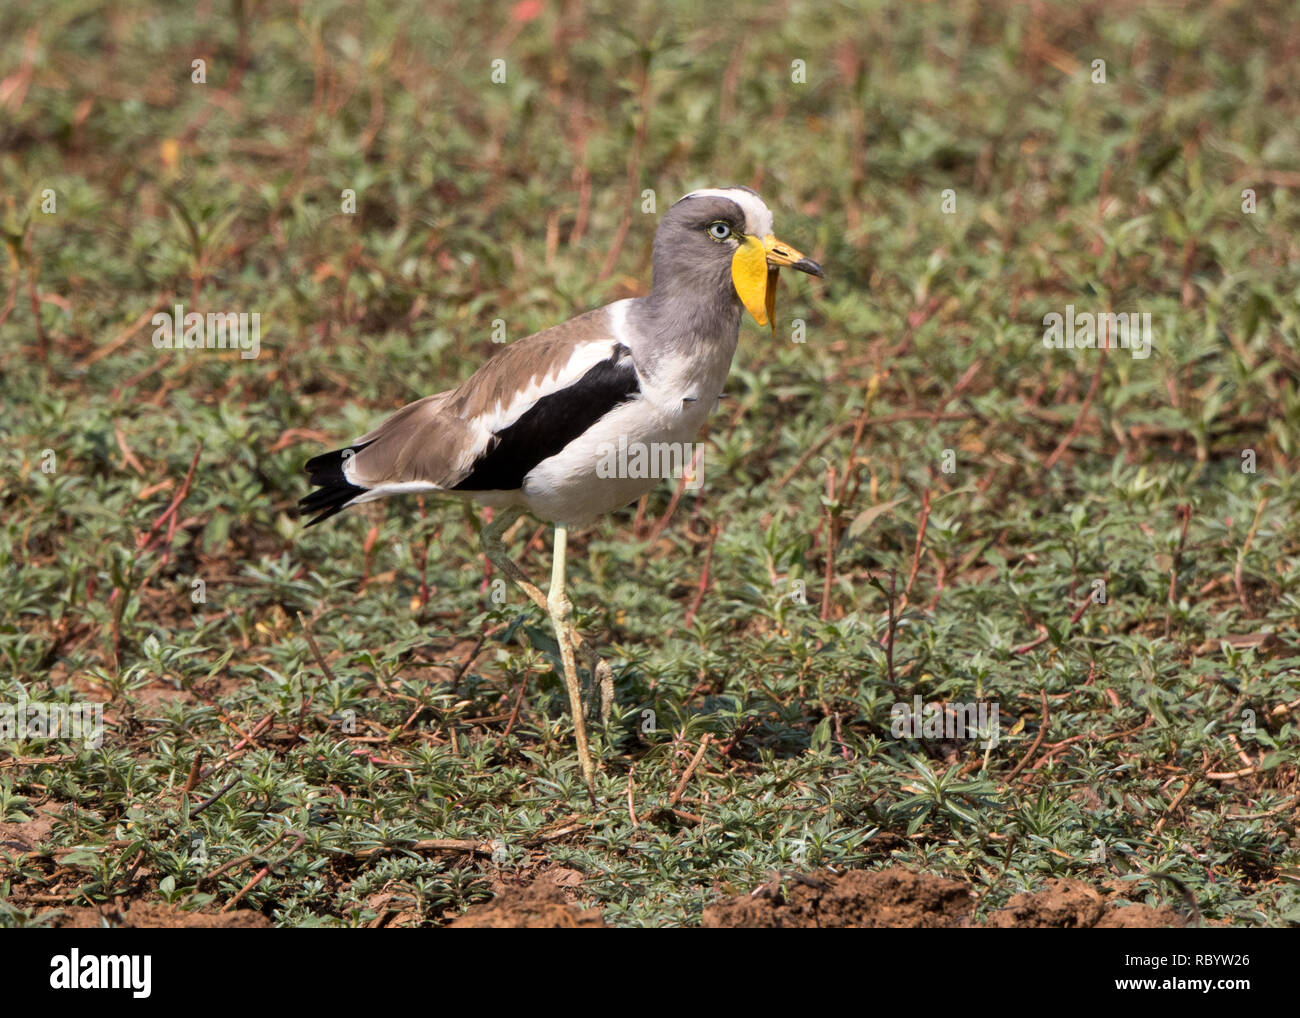 White-crowned Lapwing (Vanellus albiceps) Stock Photo